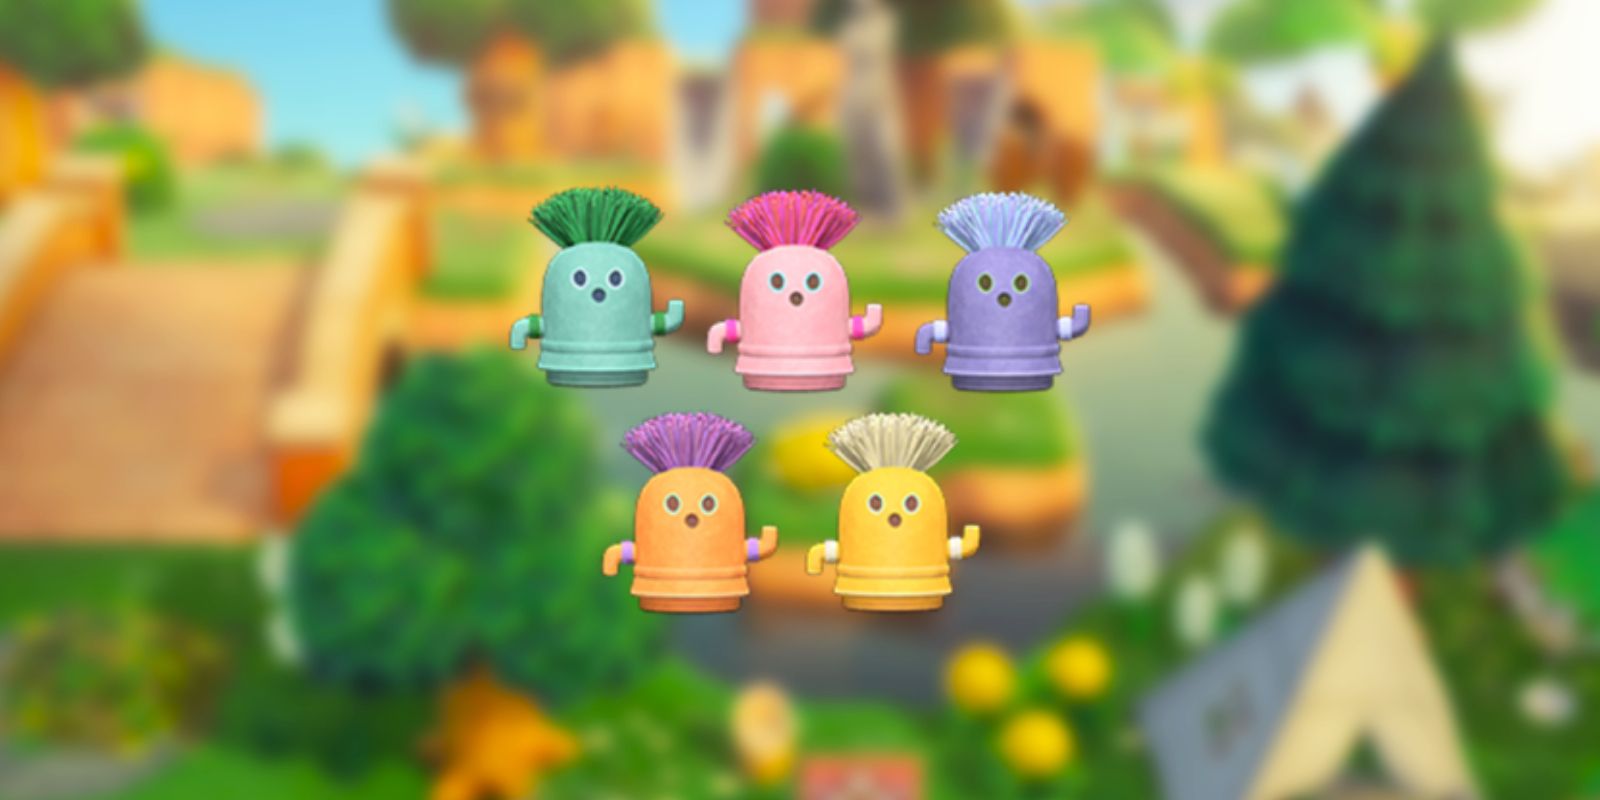 All New Gyroids In Animal Crossing 2.0 Flutteroid